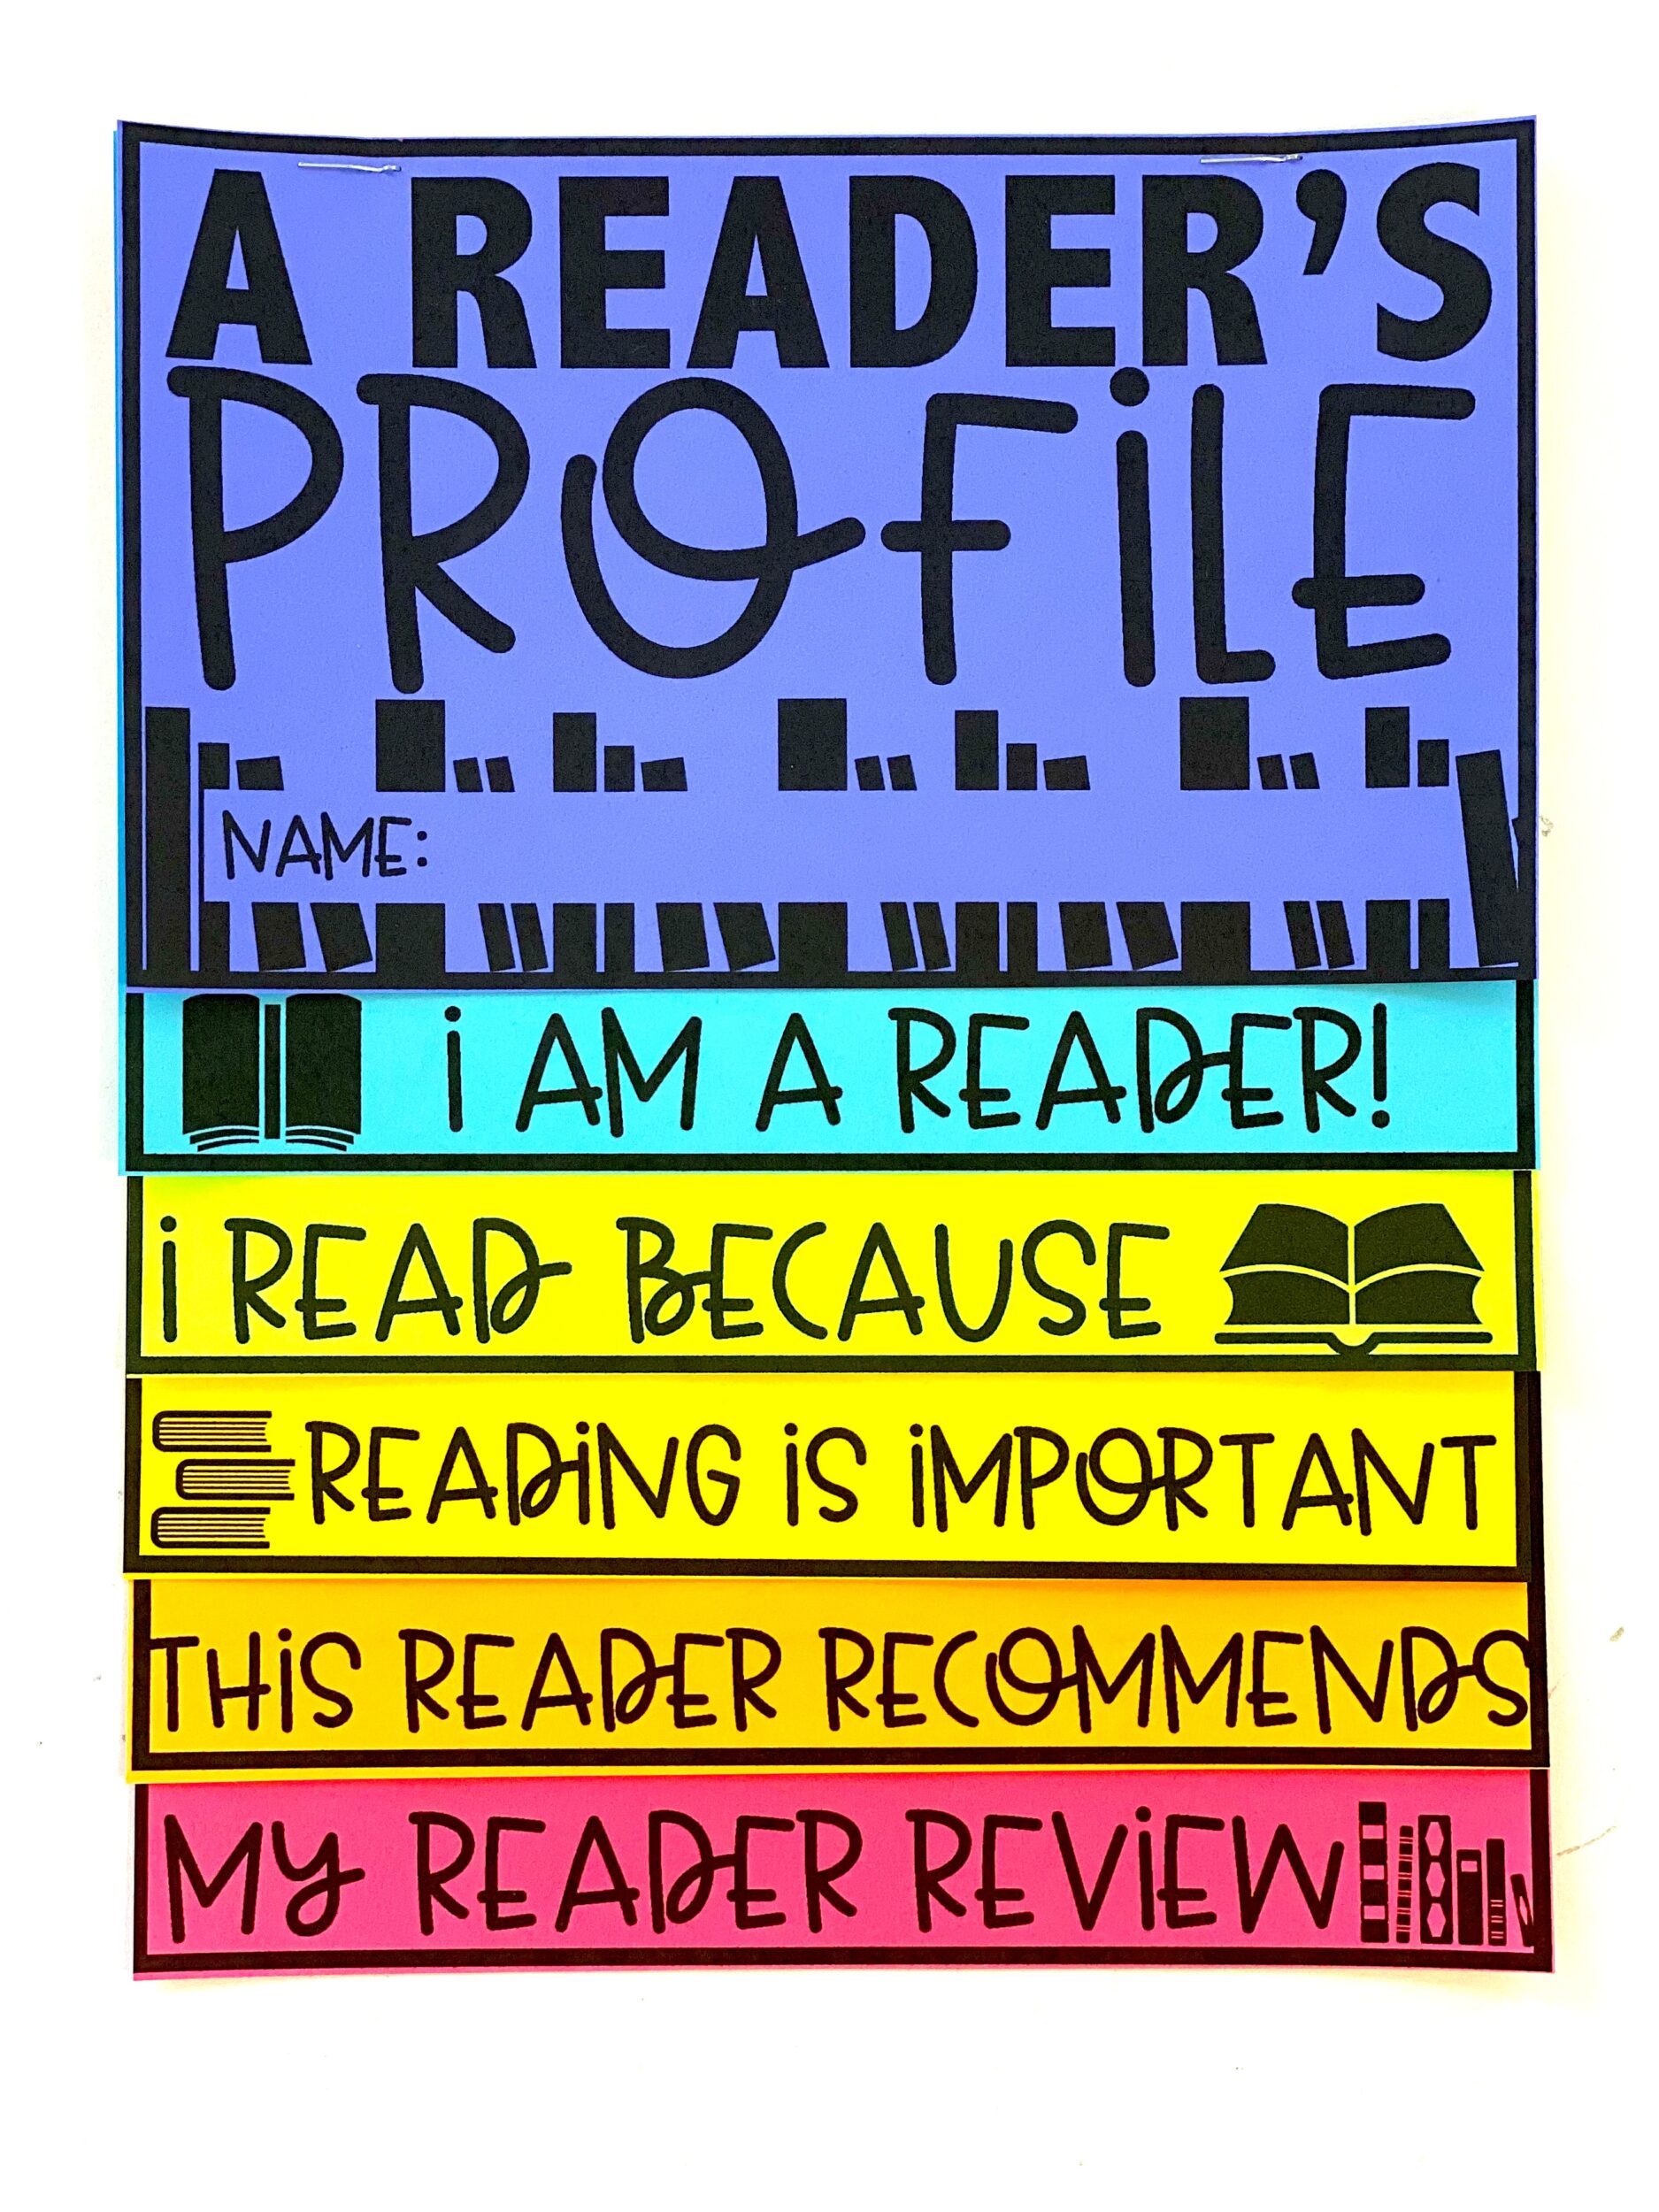 Use this reader's profile to help your students recognize themselves as readers during Read Across America week!